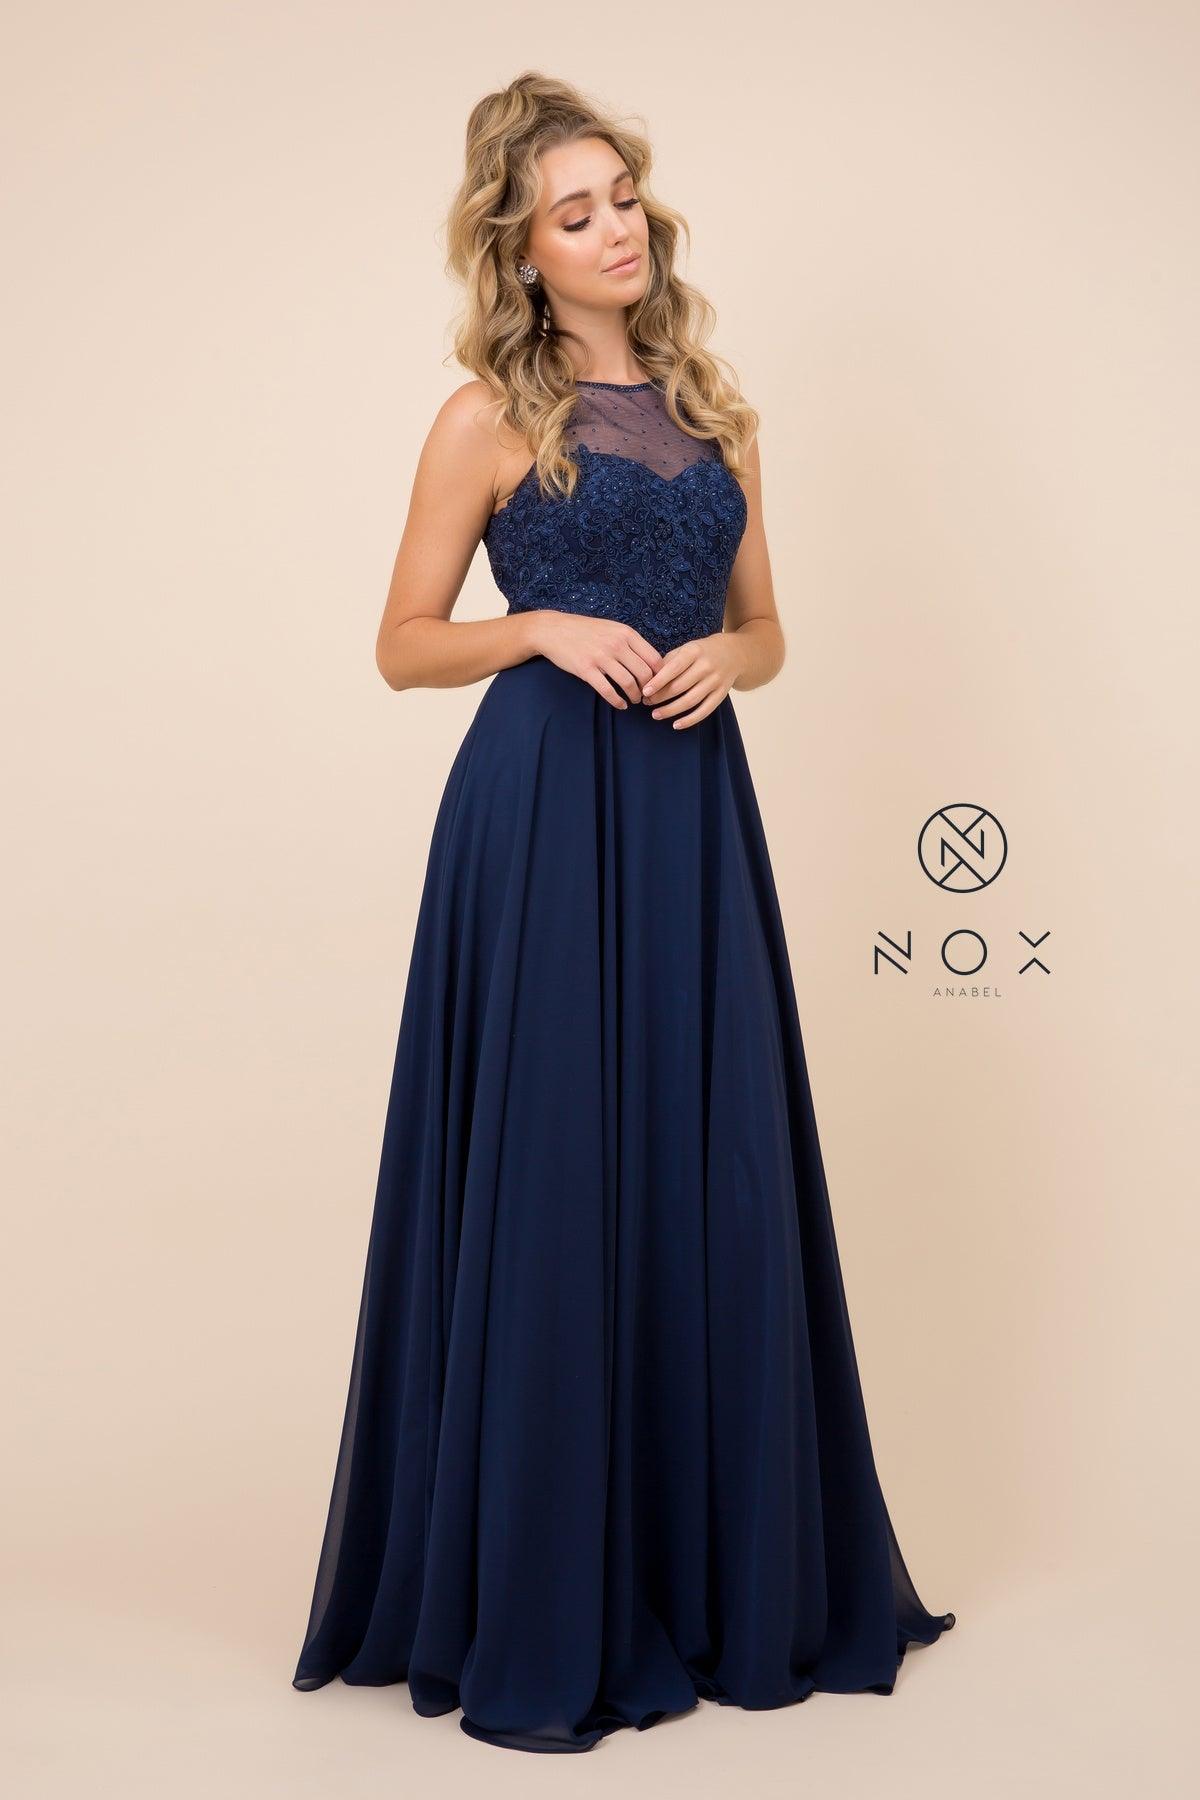 Long High Neck Formal Bridesmaid Dress - The Dress Outlet Nox Anabel